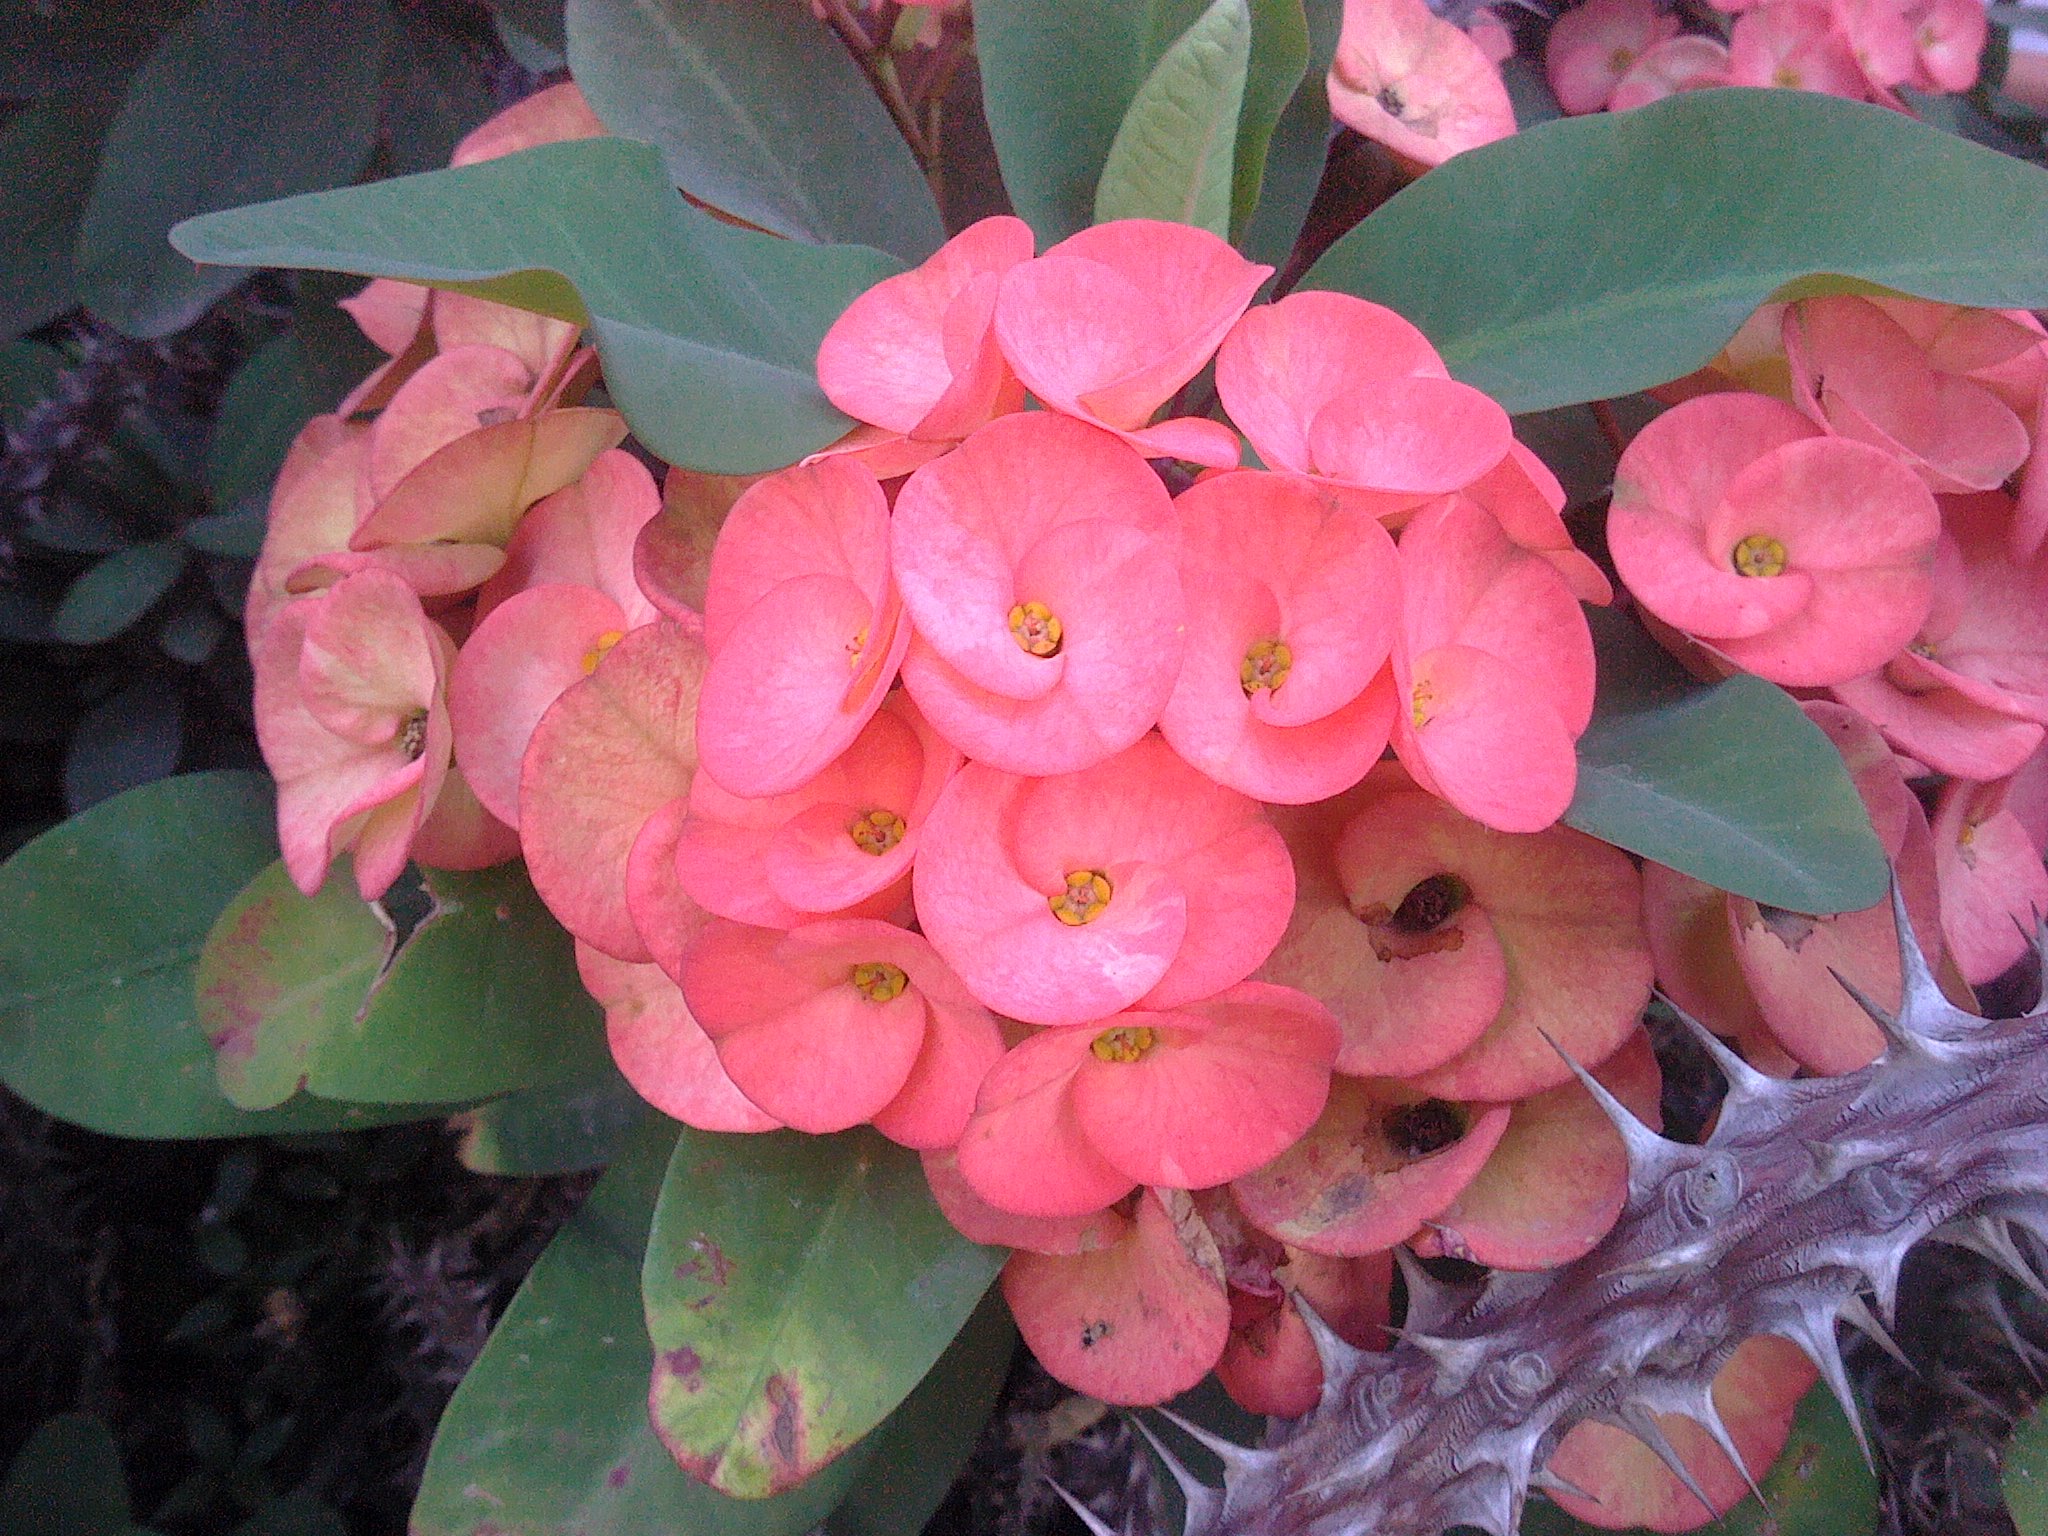 a picture of some pink flowers and green leaves